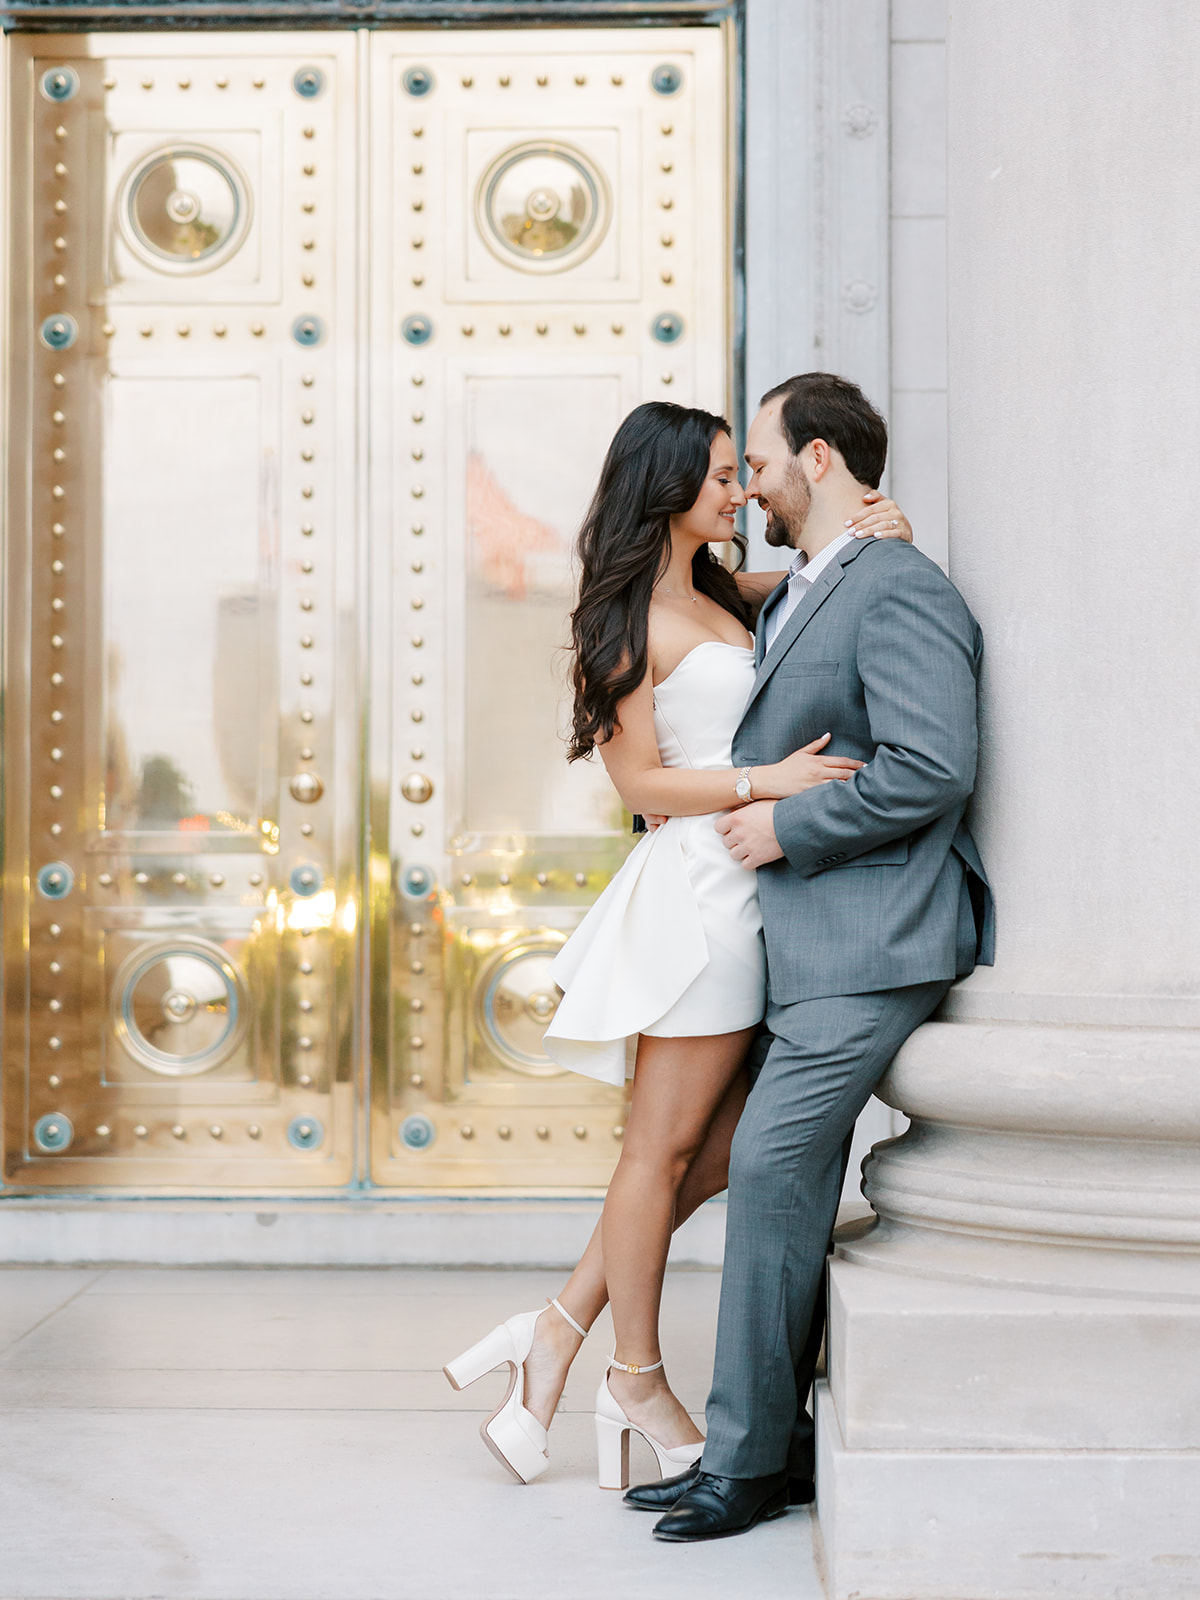 Couple leaning close to each other in front of gold doors